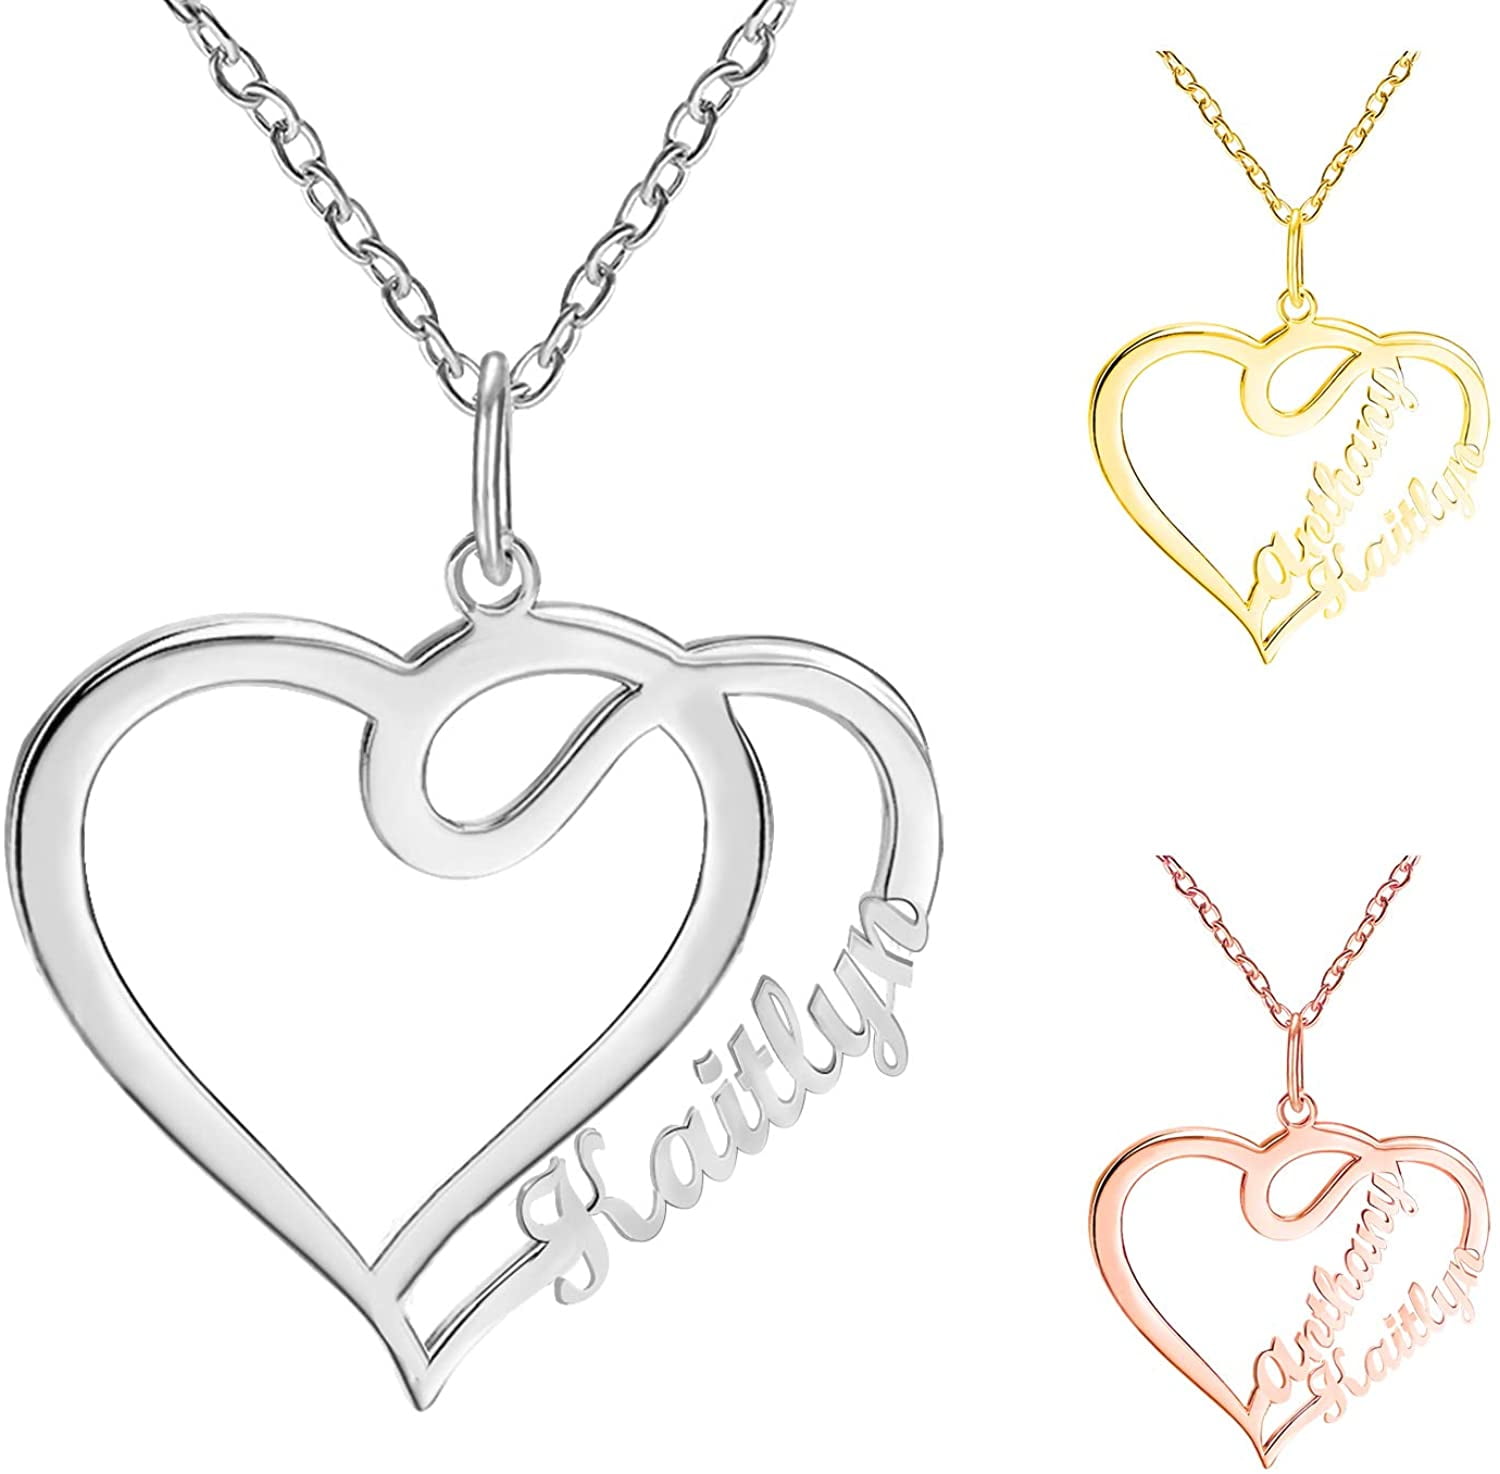 Custom Any Name Heart Necklace 925 Silver Necklace Personalized Christmas Gifts